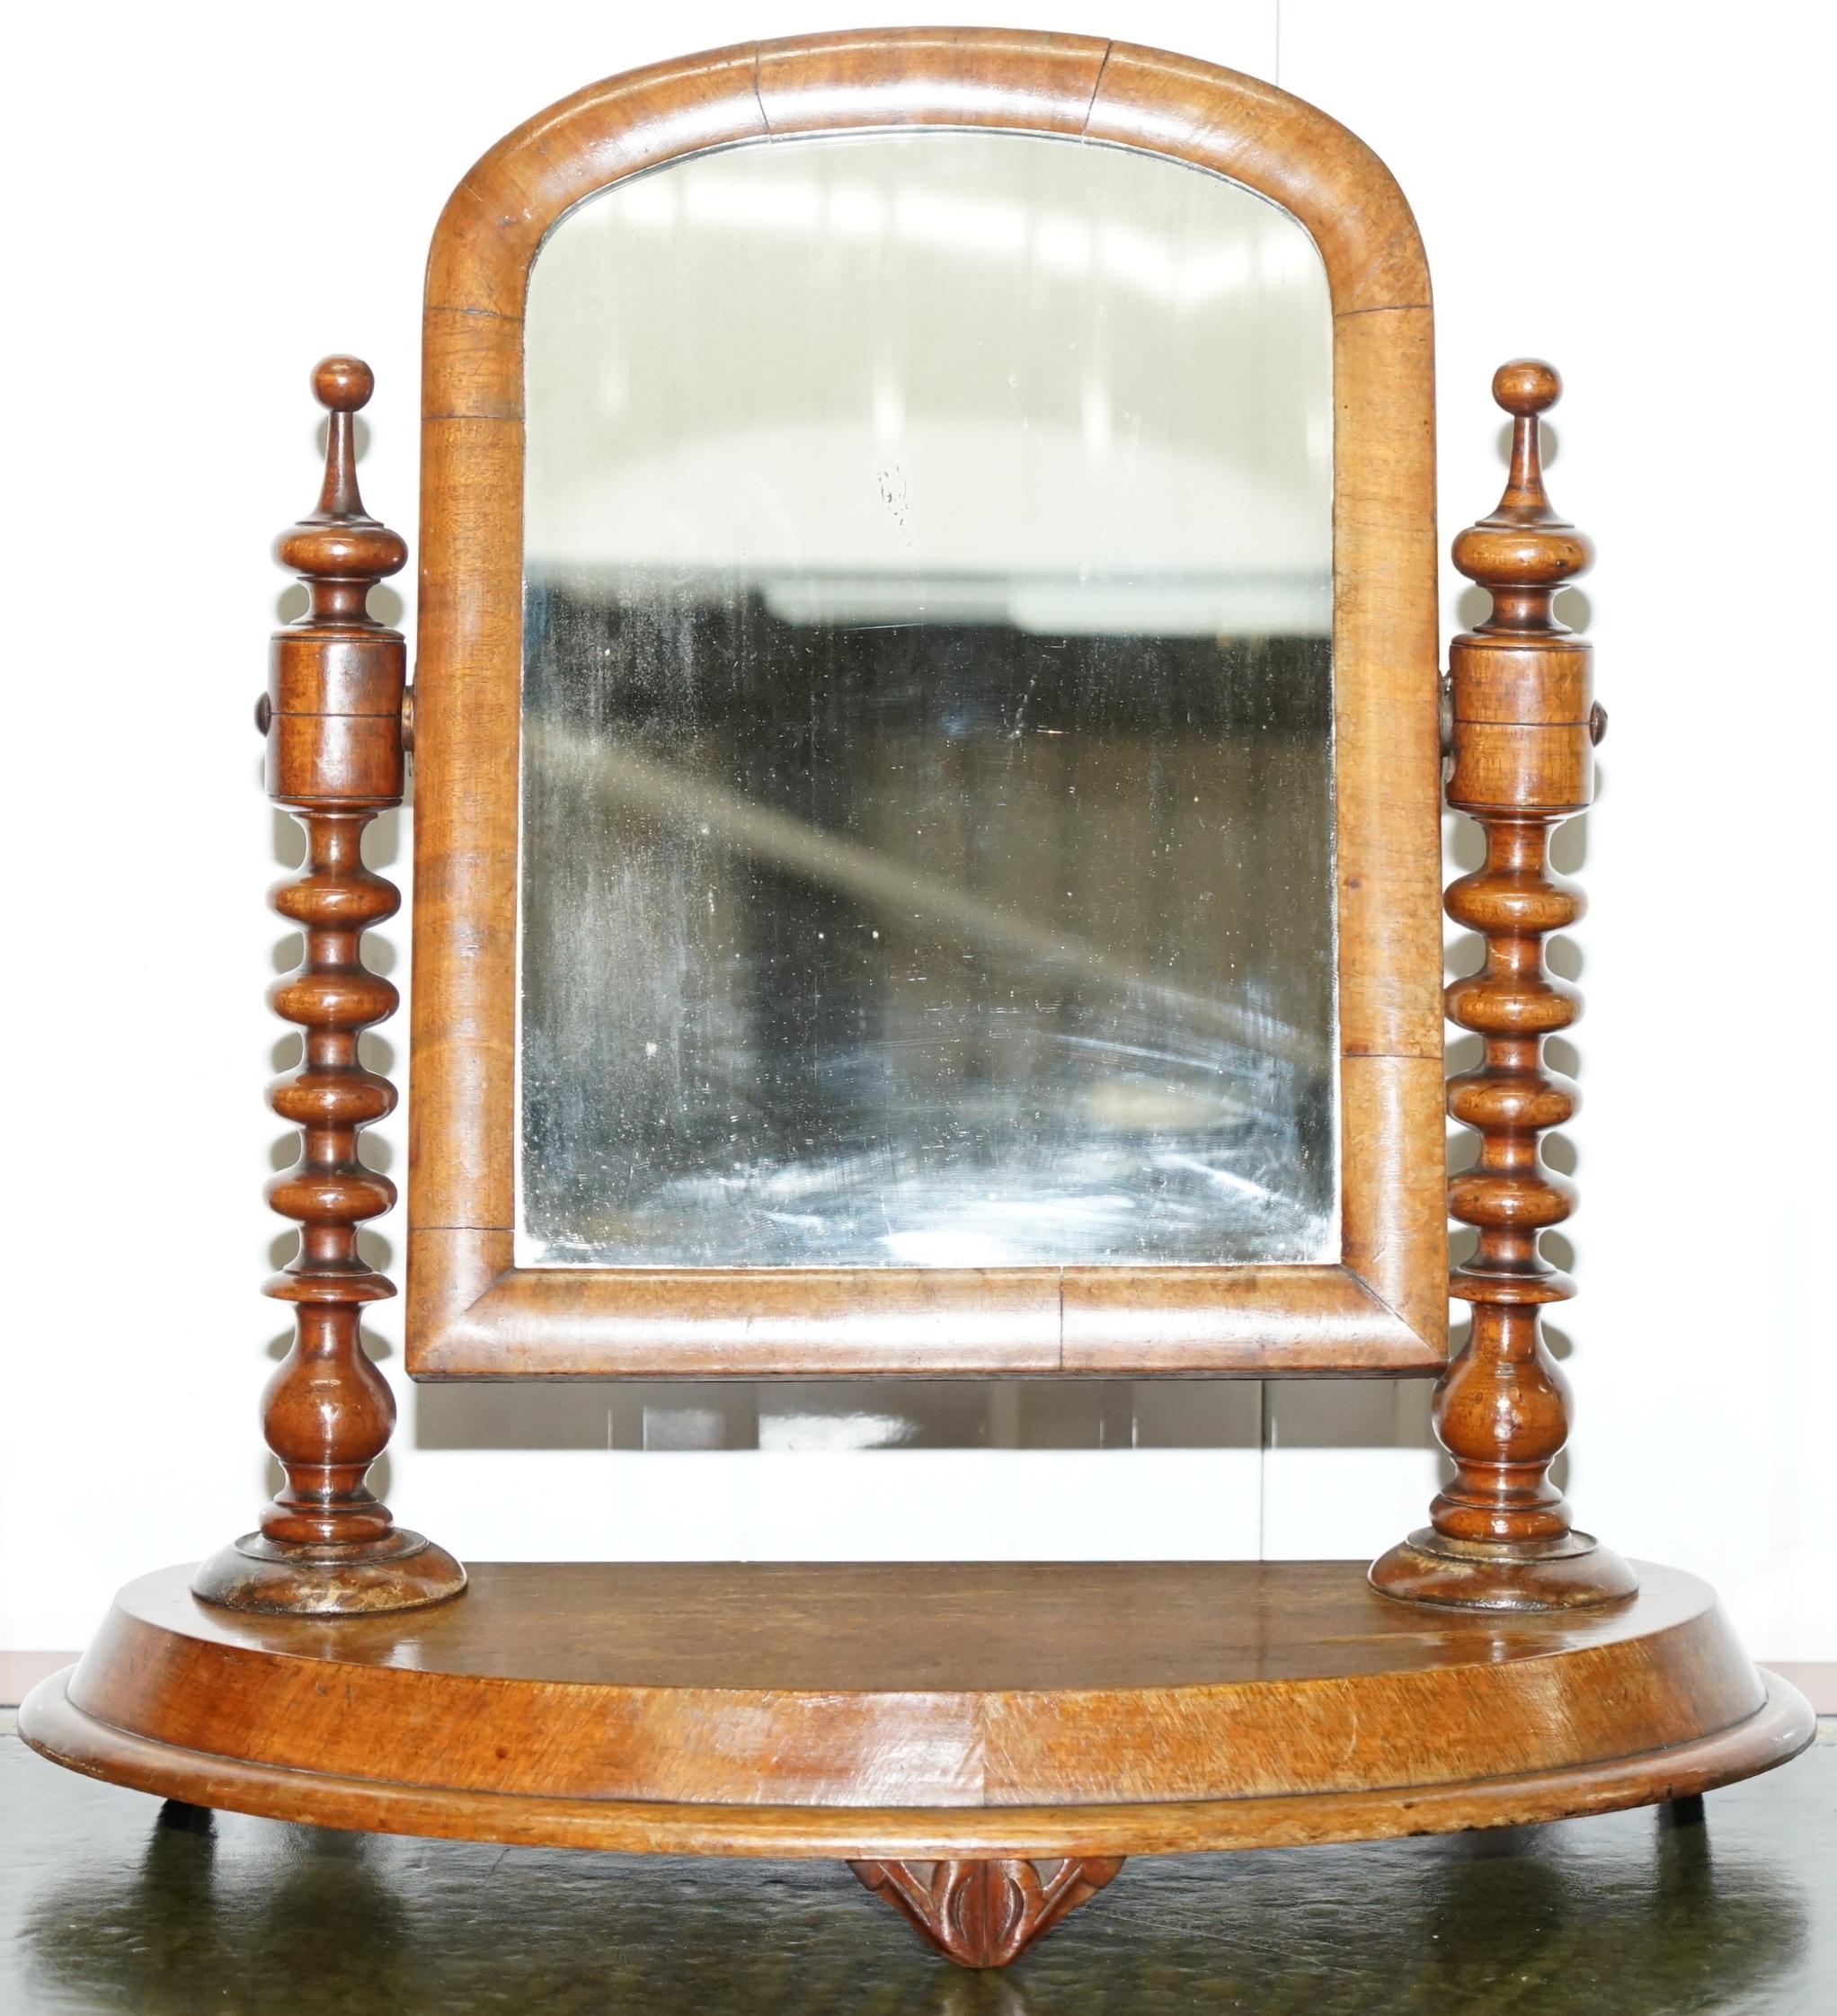 We are delighted to offer for sale this lovely tabletop Georgian Walnut toilet, dressing table bathroom mirror

A very good looking decorative mirror with original plate glass, the timber has aged nicely and is showing normal timber splits and